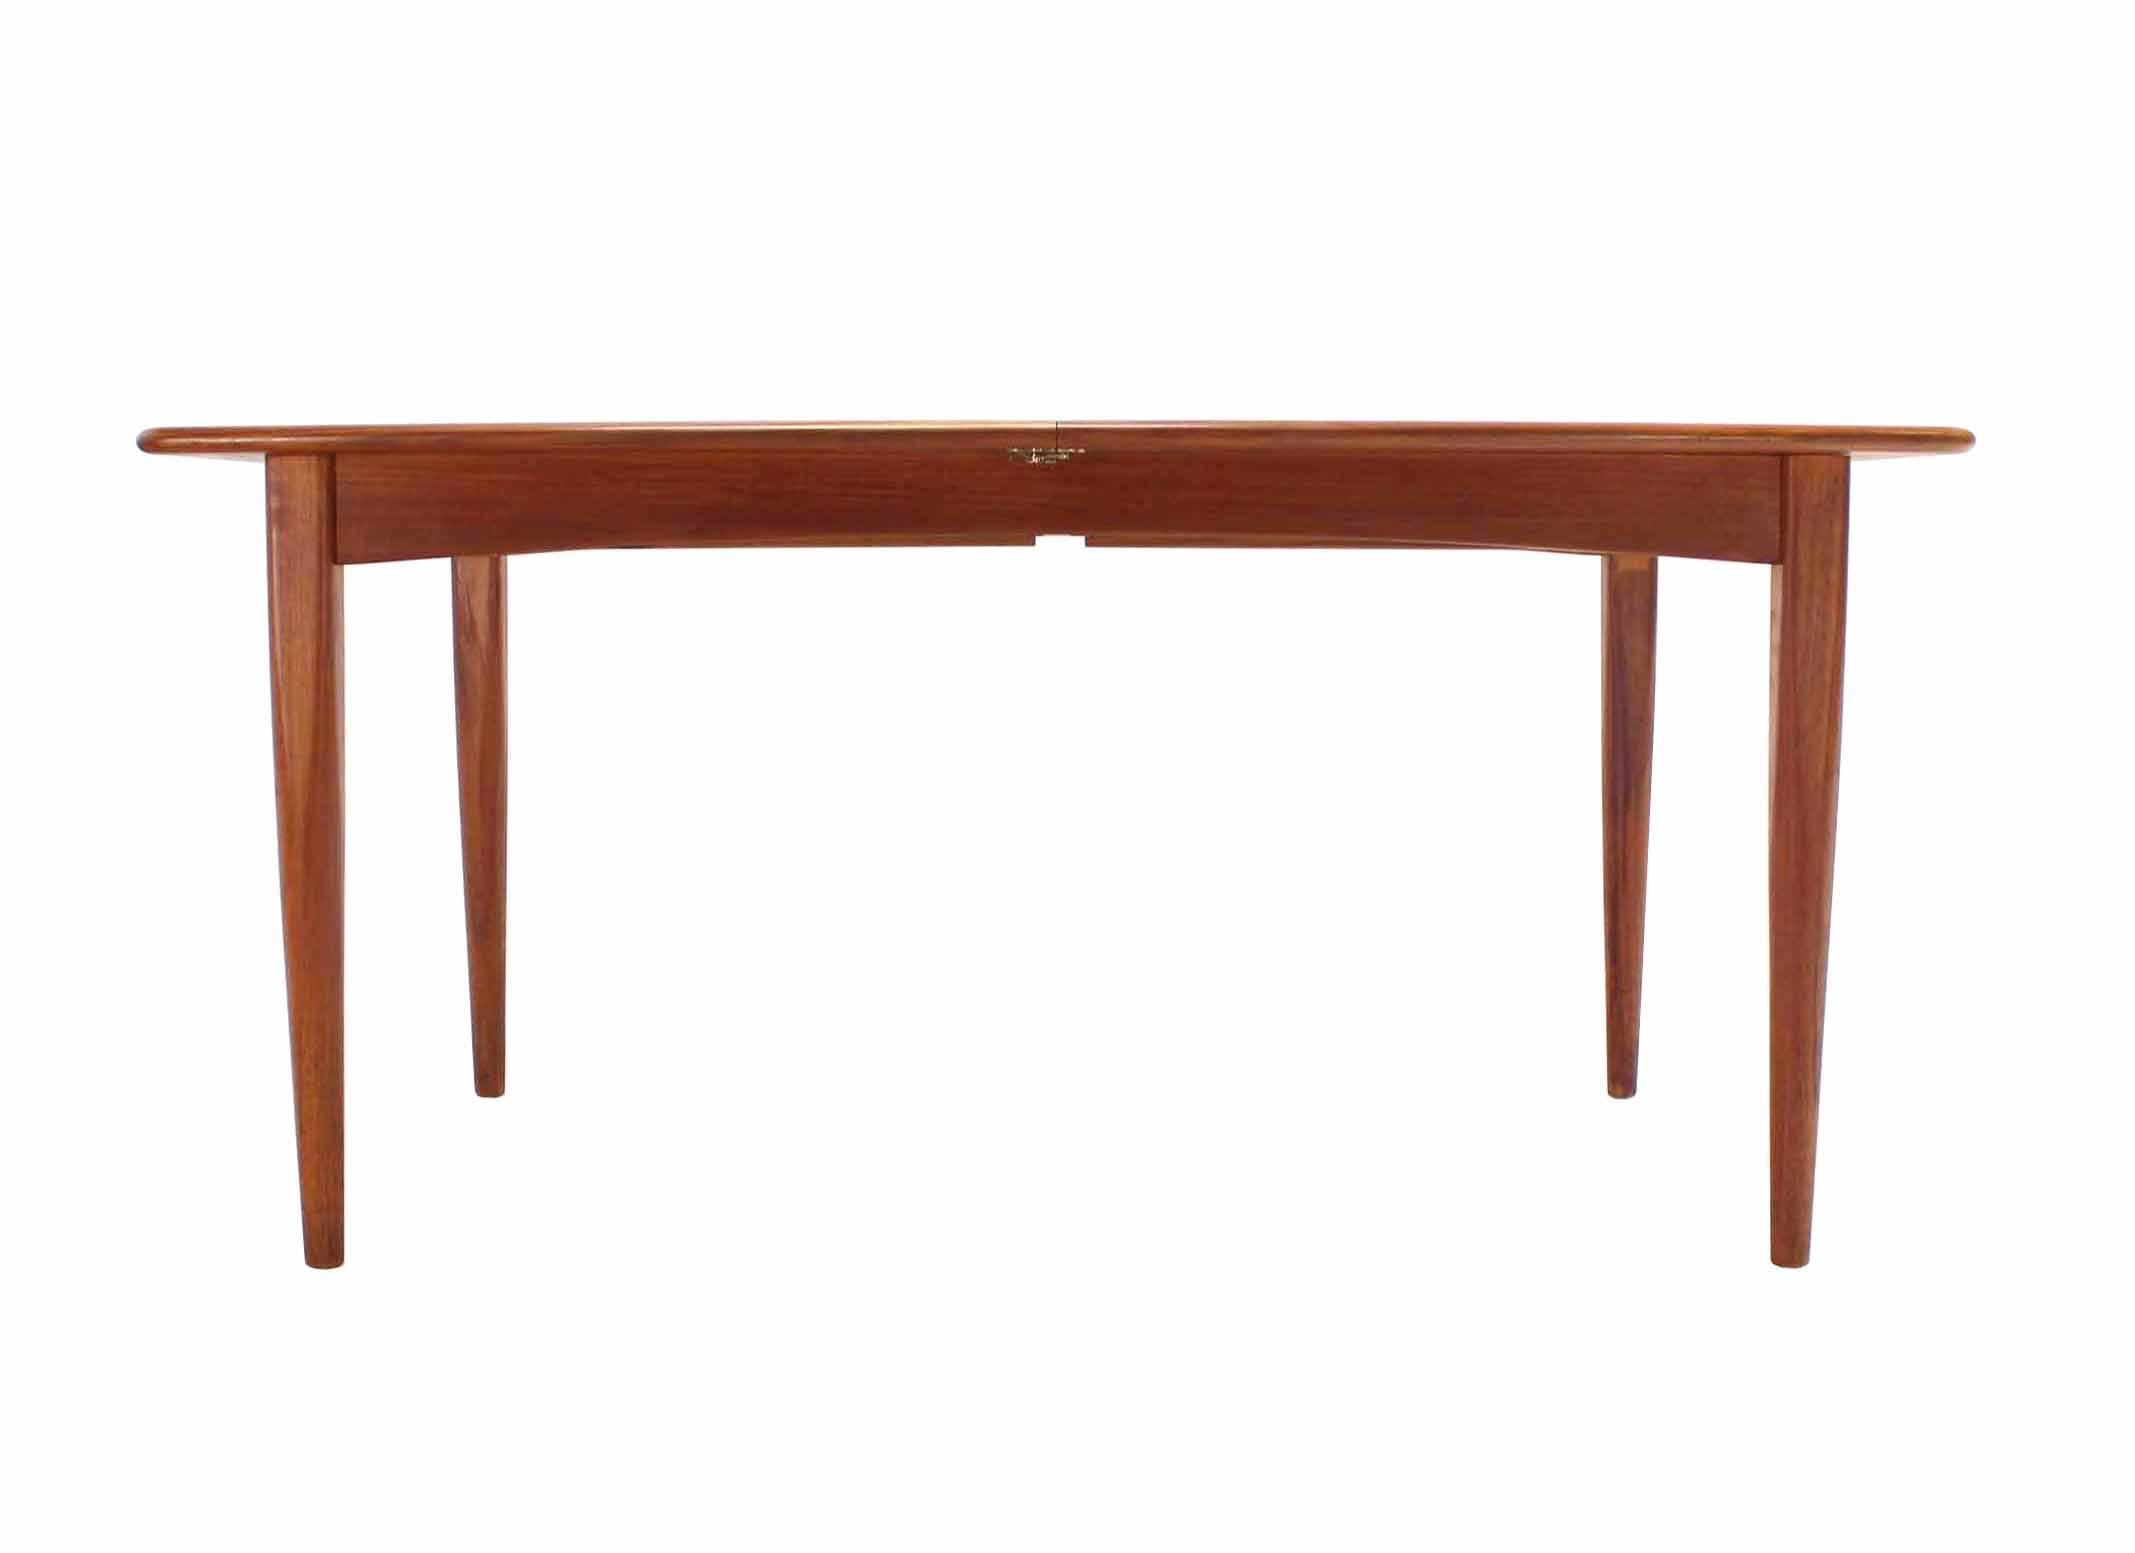 American Danish Modern Teak Boat Shape Dining Table with Two Pop-Up Leafs Extension Board For Sale